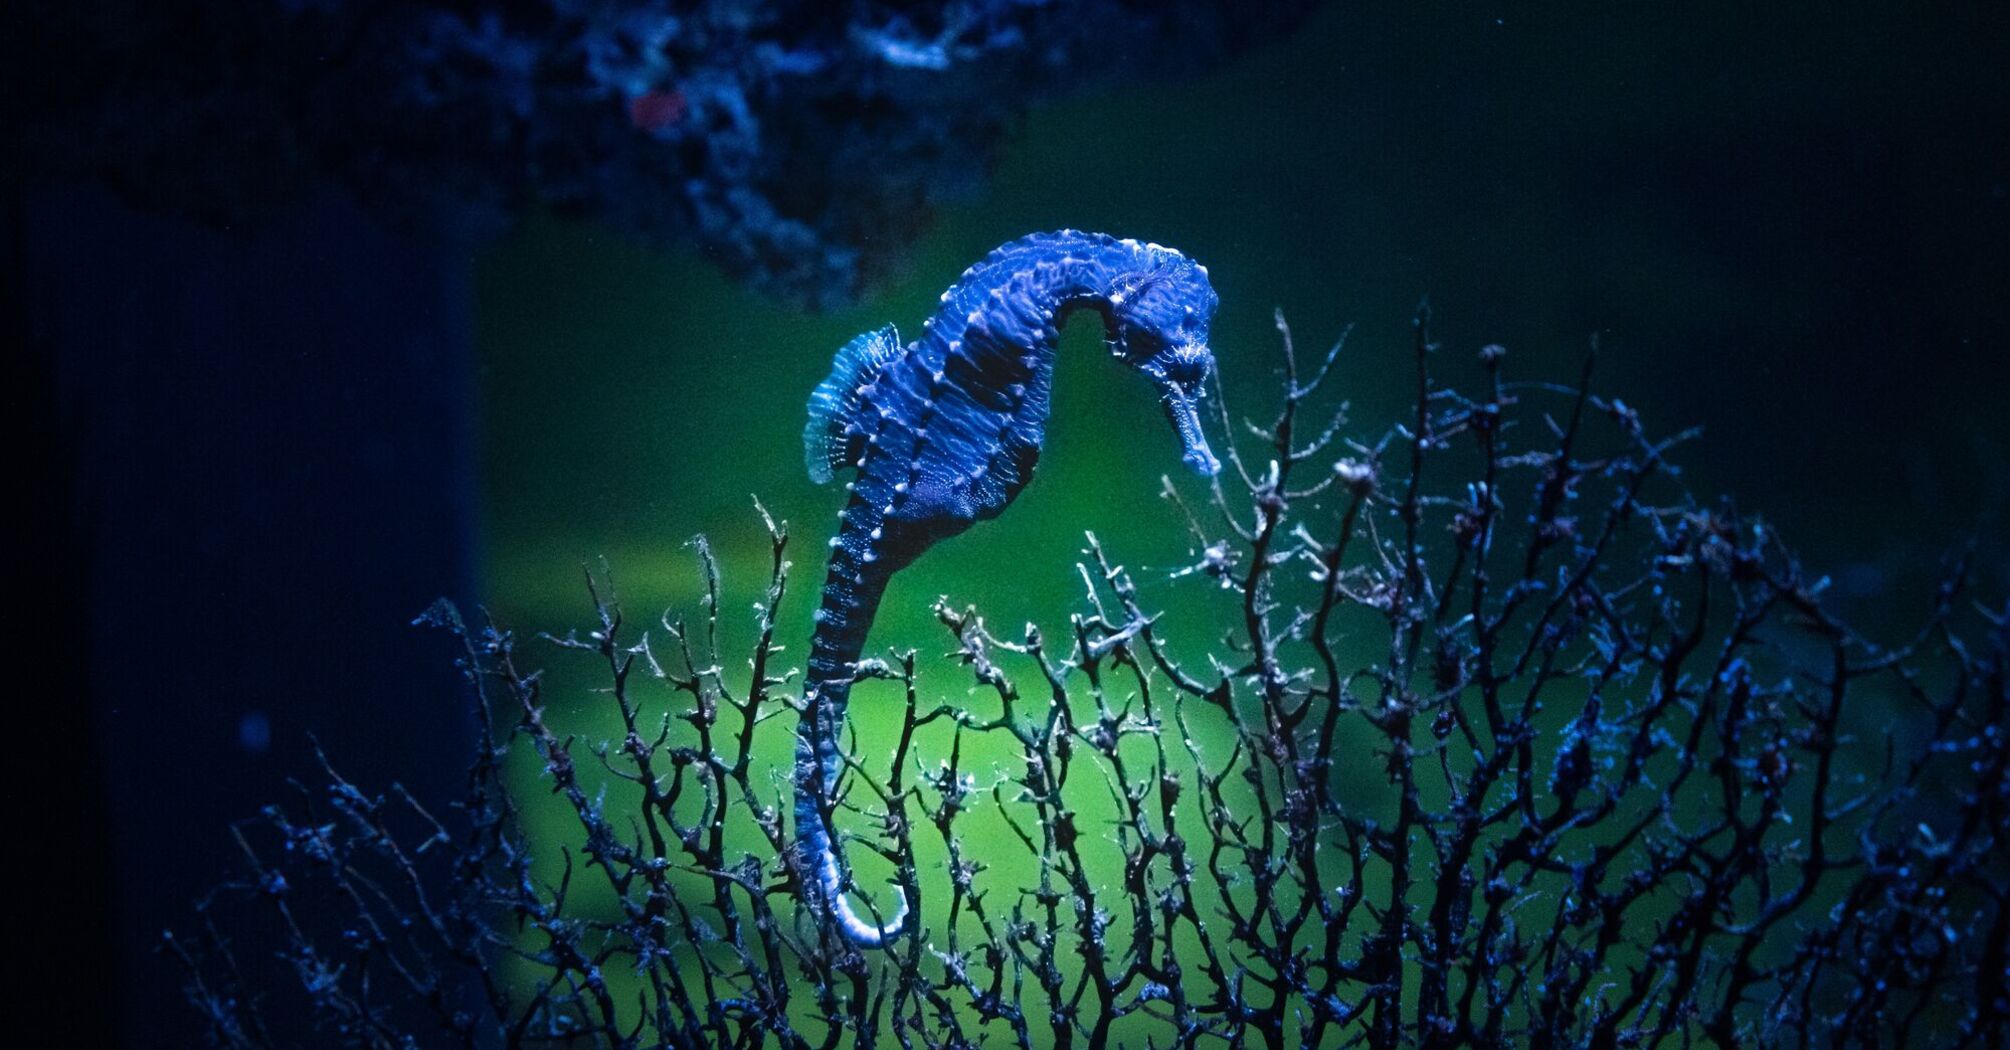 A seahorse clinging to coral in blue ocean water